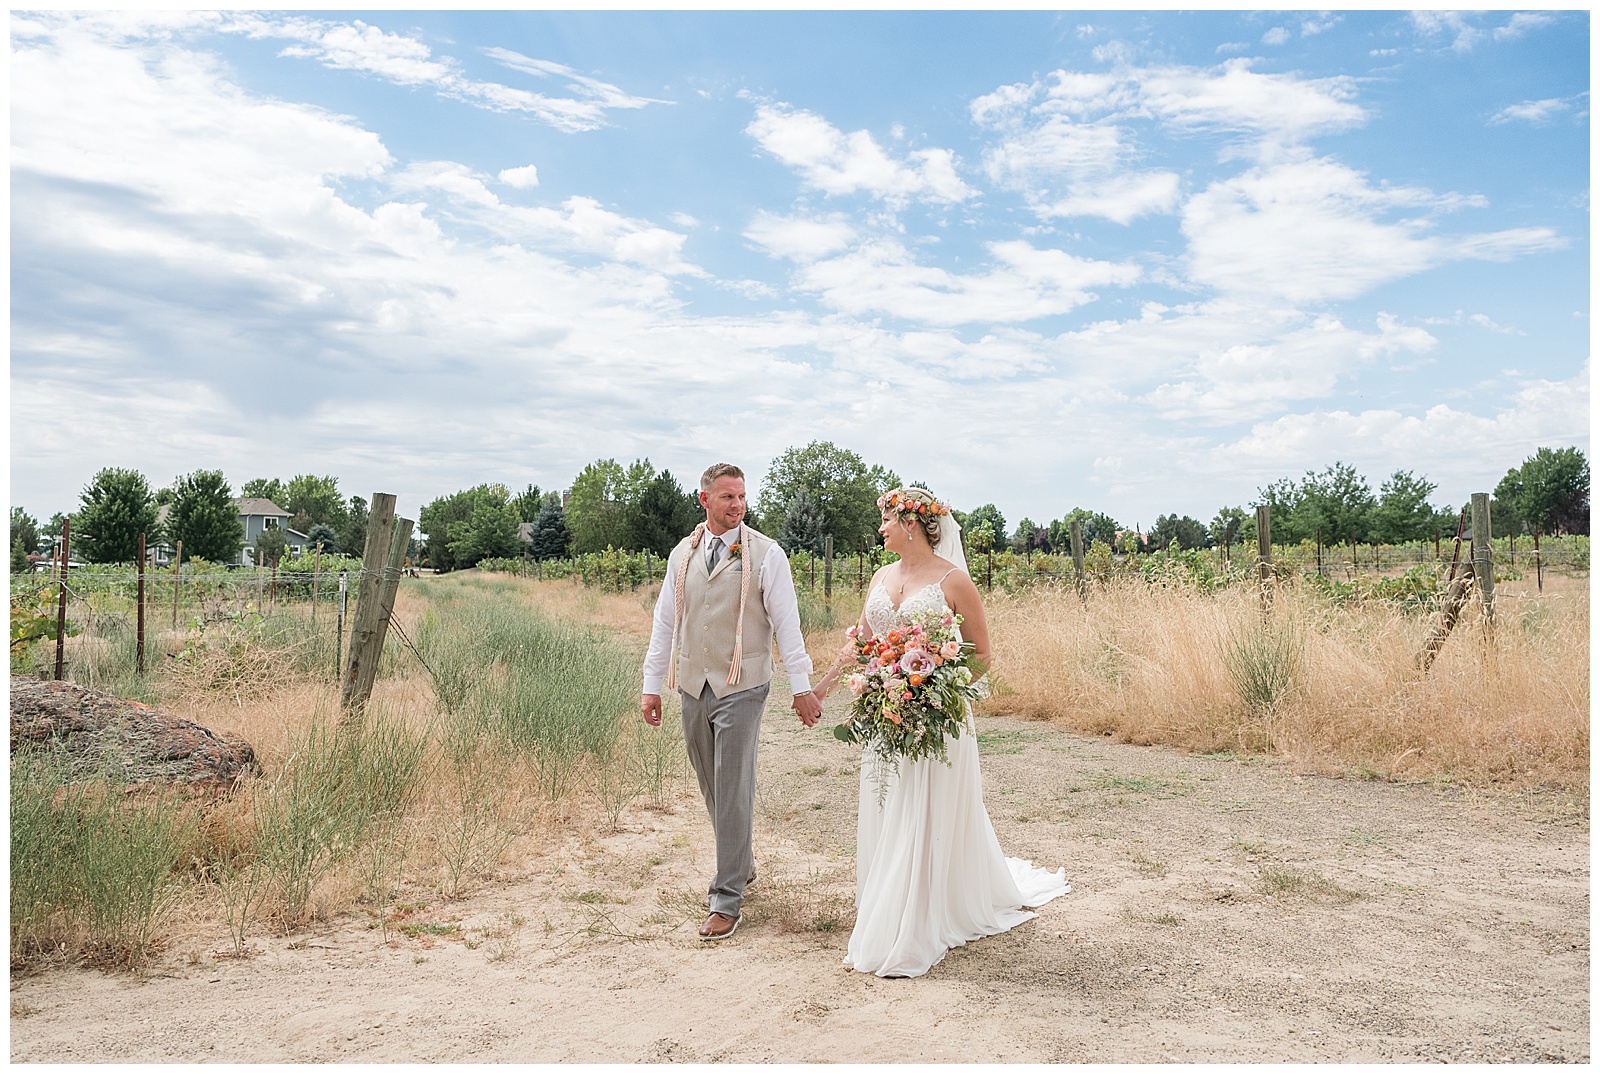 A Beautiful Earthy Themed Wedding at The Flats 16